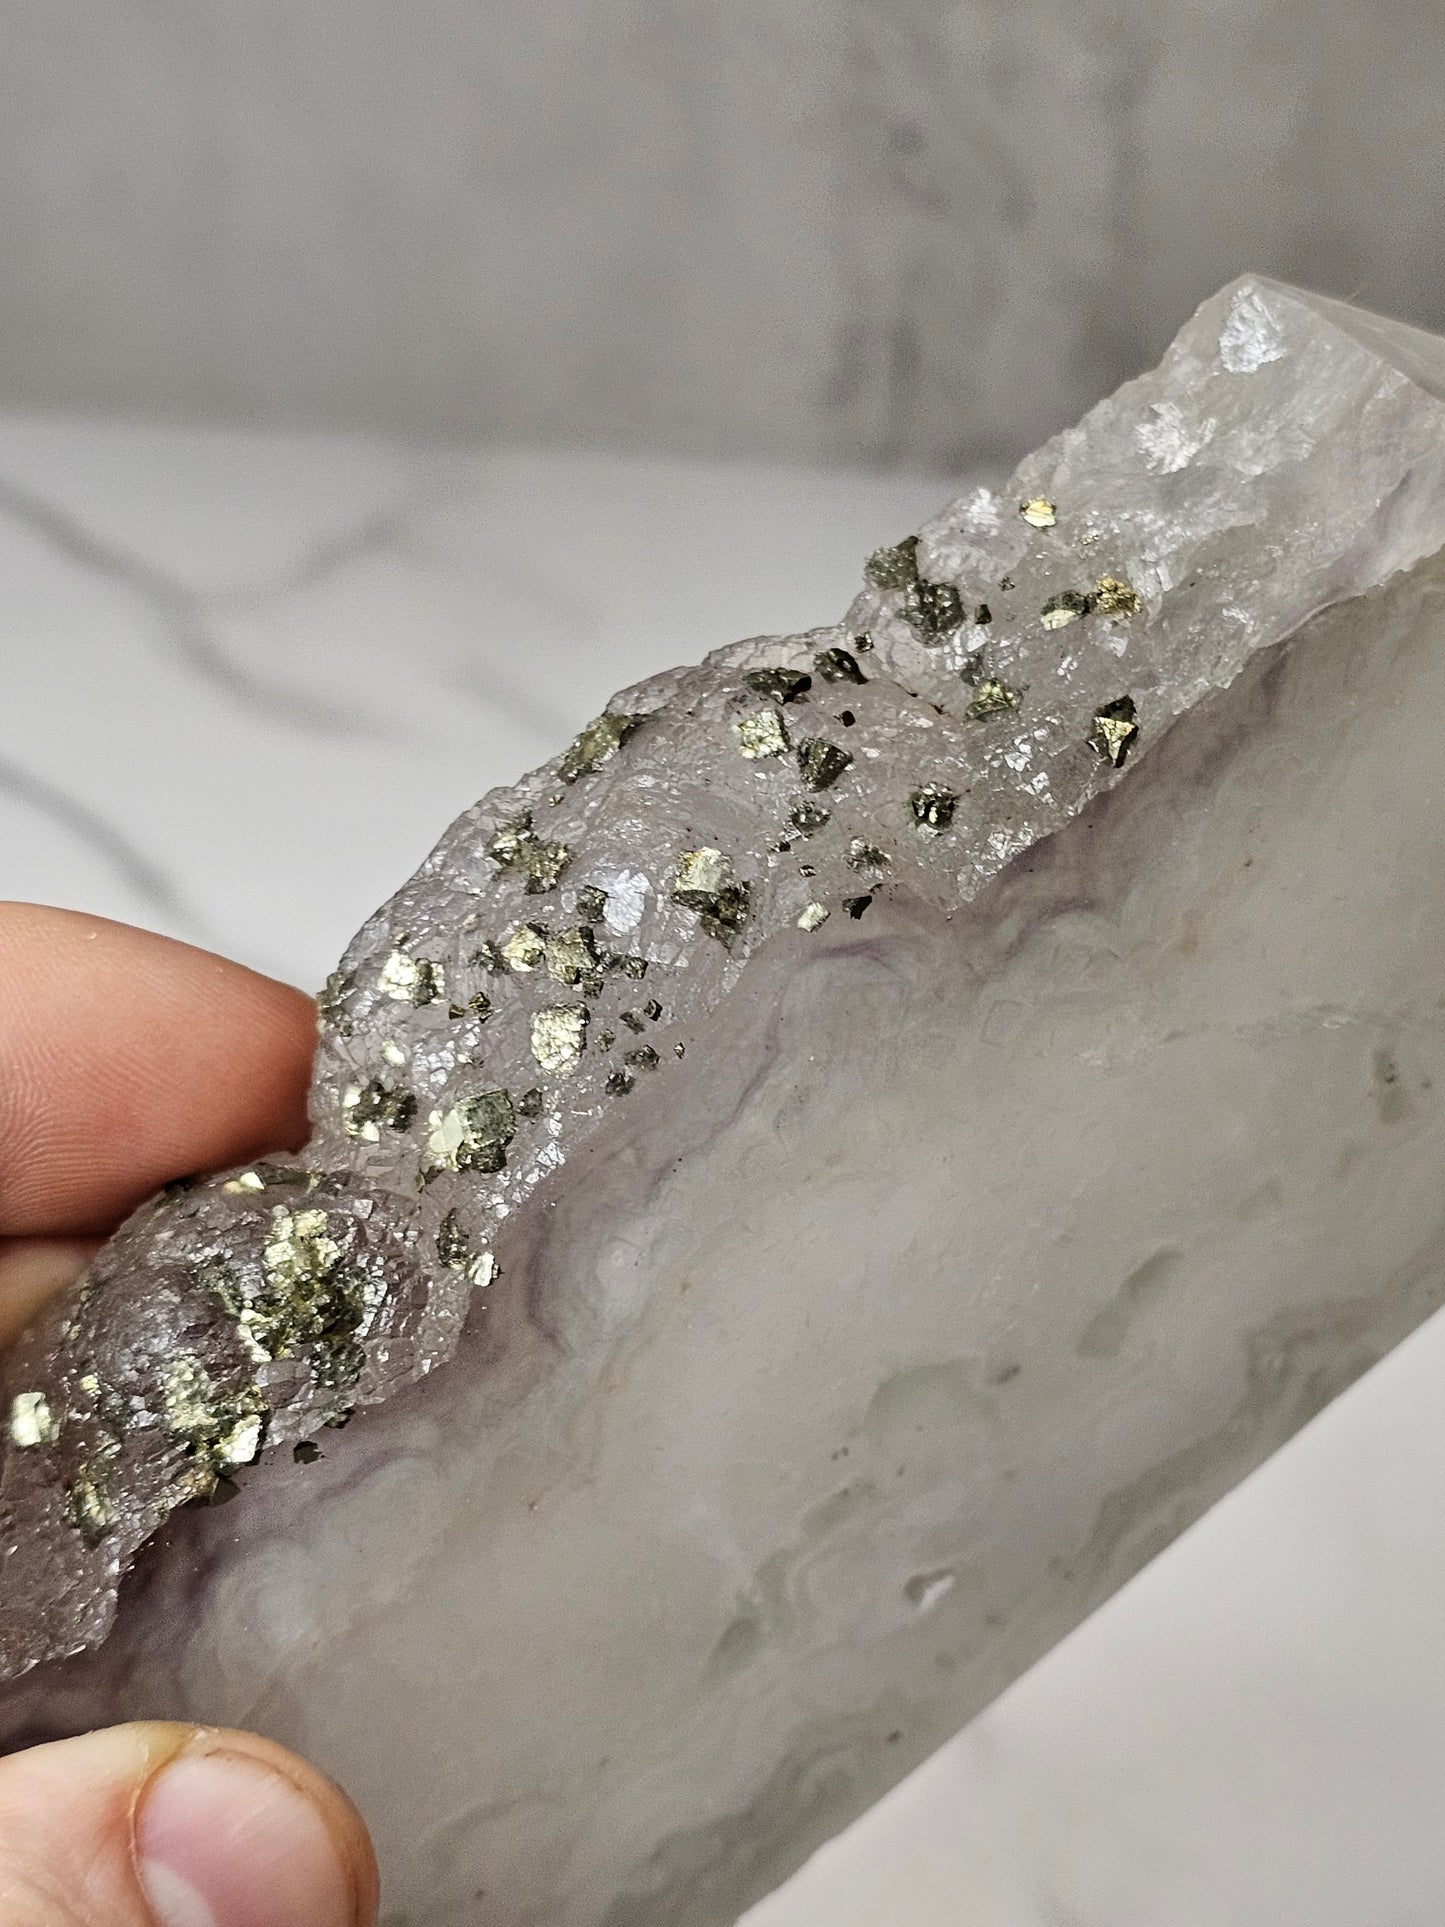 Pyrite on Fluorite Natural Tower Slice